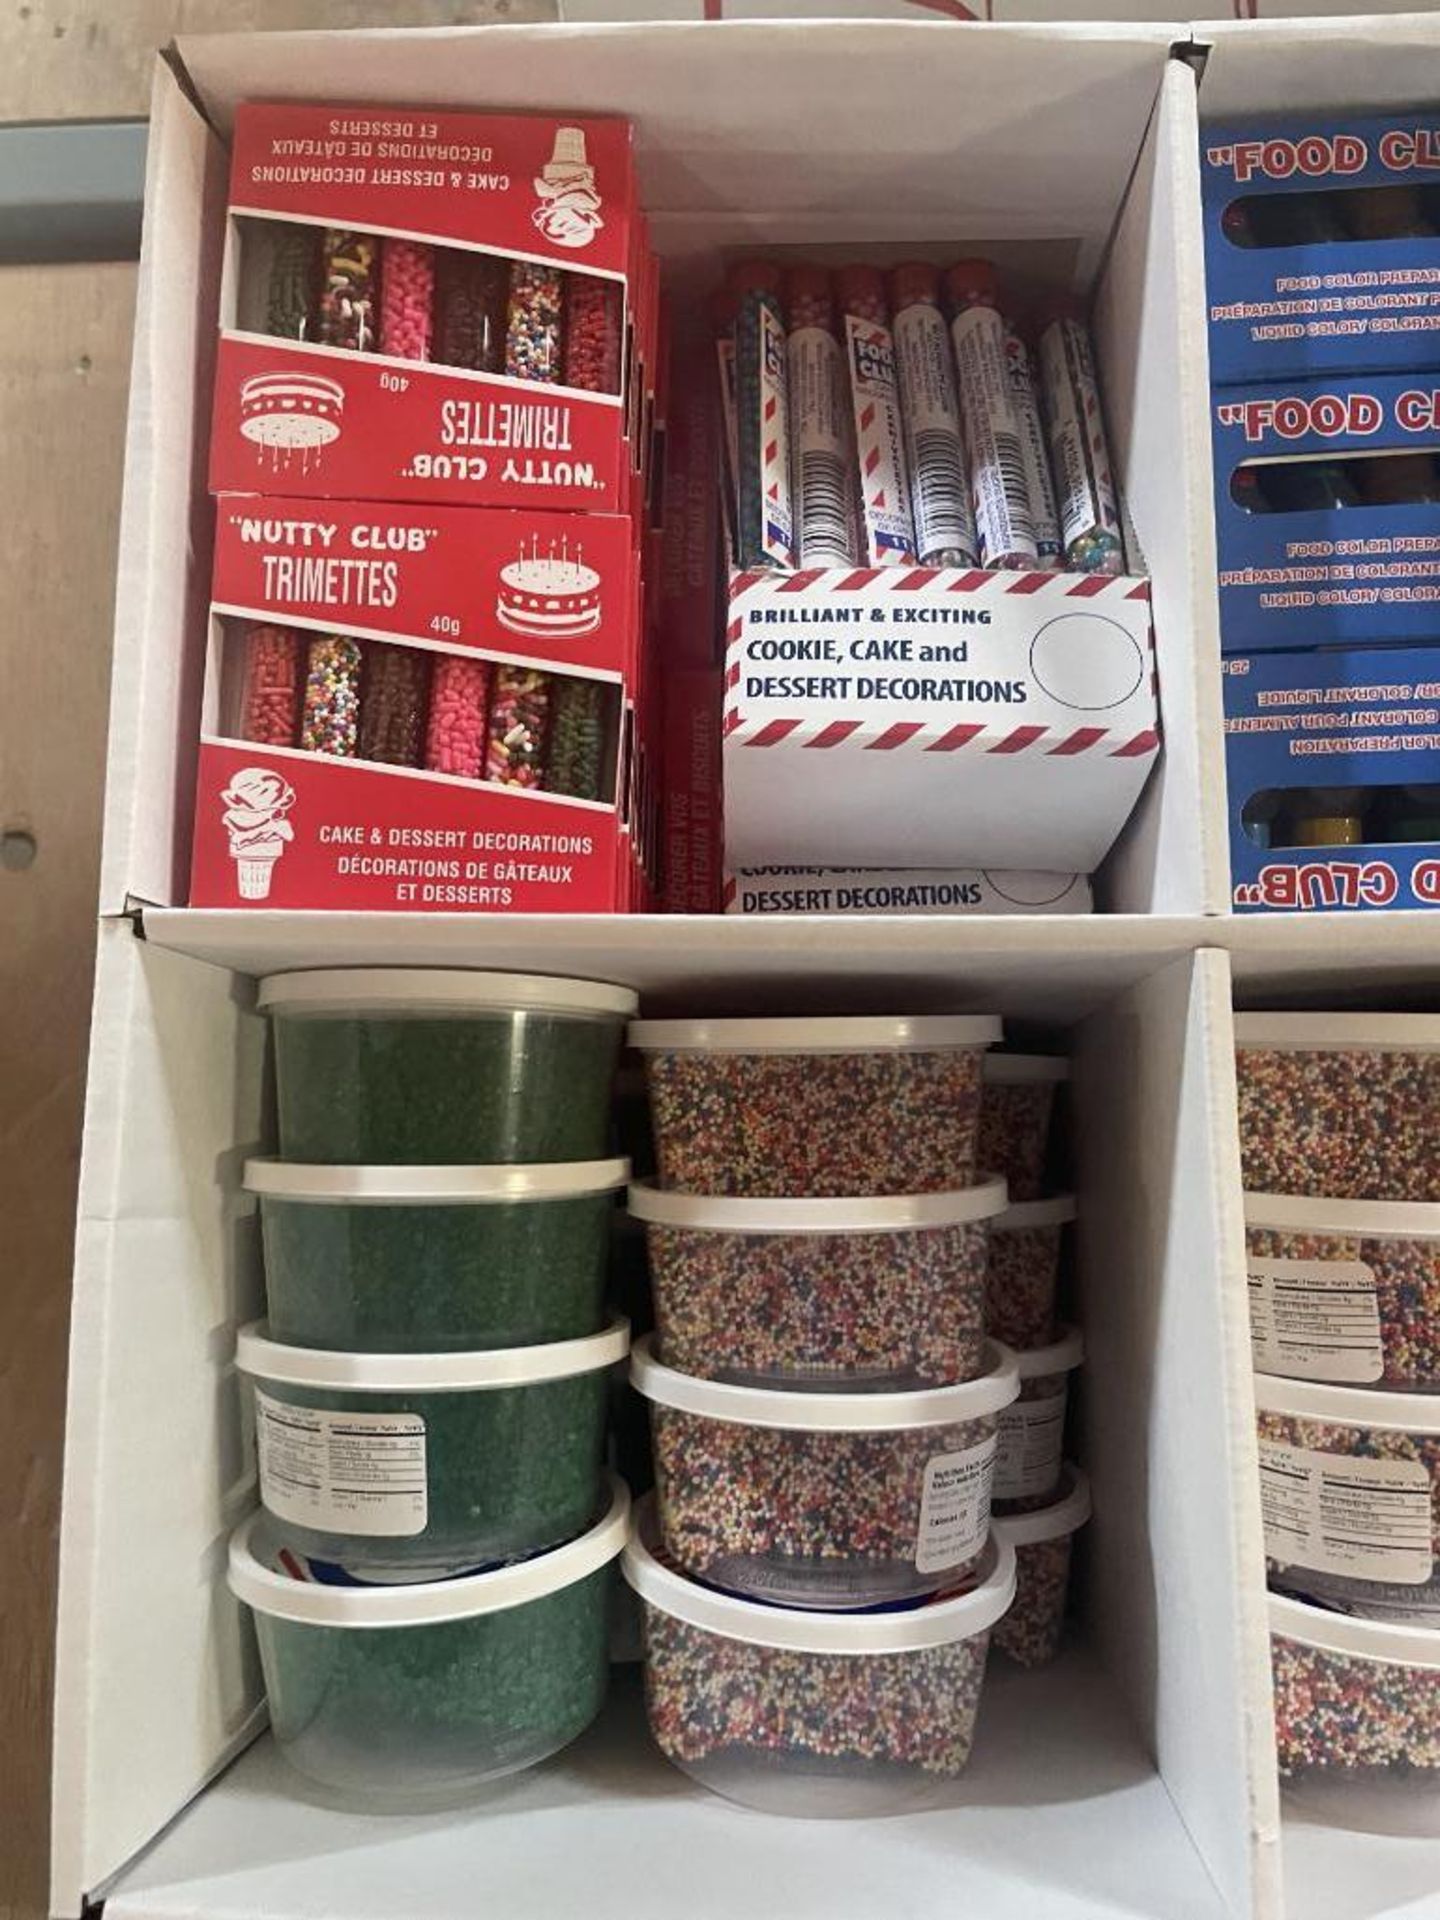 NUTTY CLUB BAKING SUPPLIES FREESTANDING RETAIL DISPLAY - Image 3 of 6